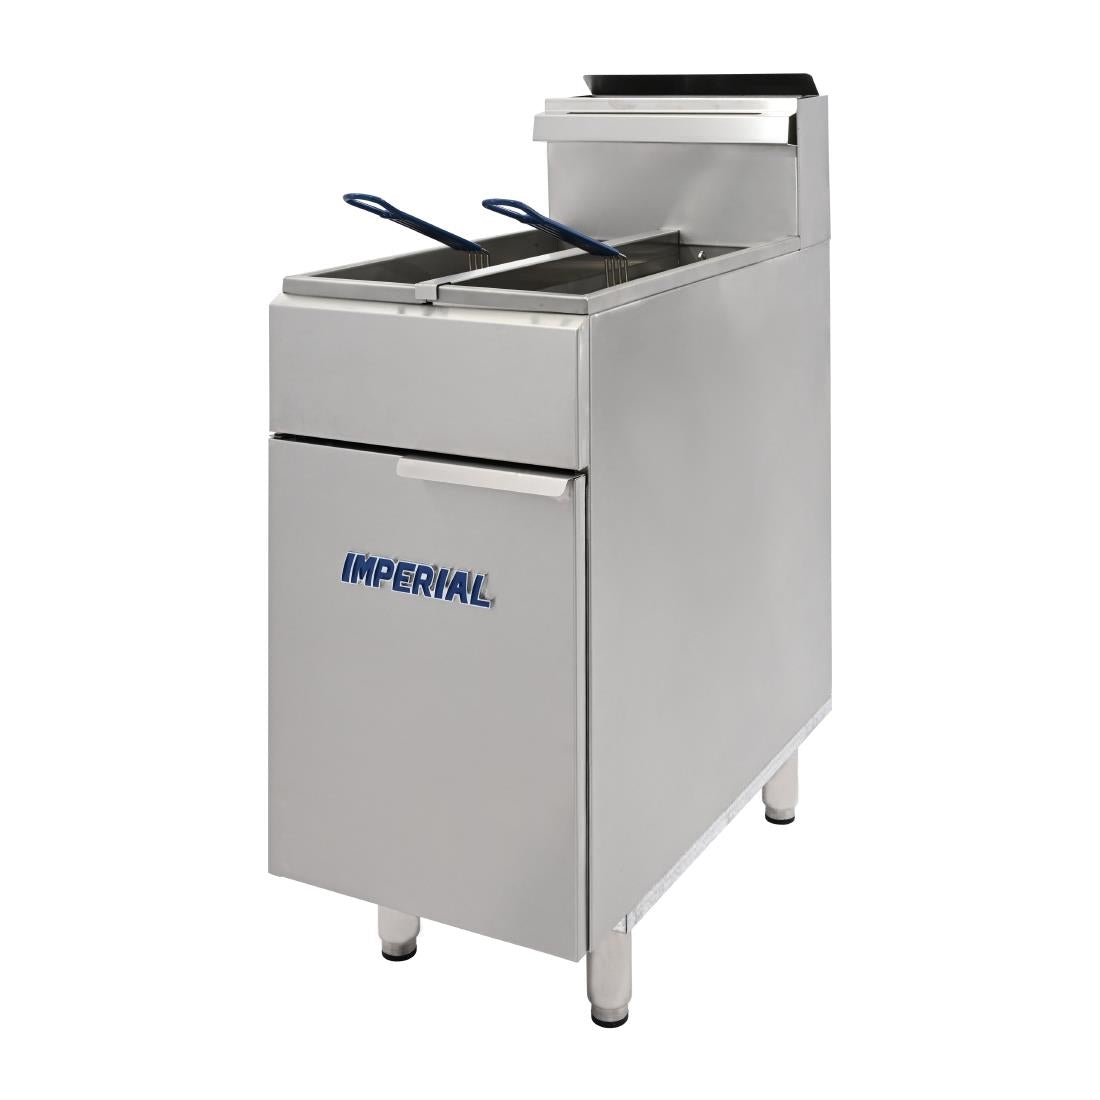 CB098-P Imperial Twin Tank Twin Basket Free Standing Propane Gas Fryer IFS-2525 JD Catering Equipment Solutions Ltd